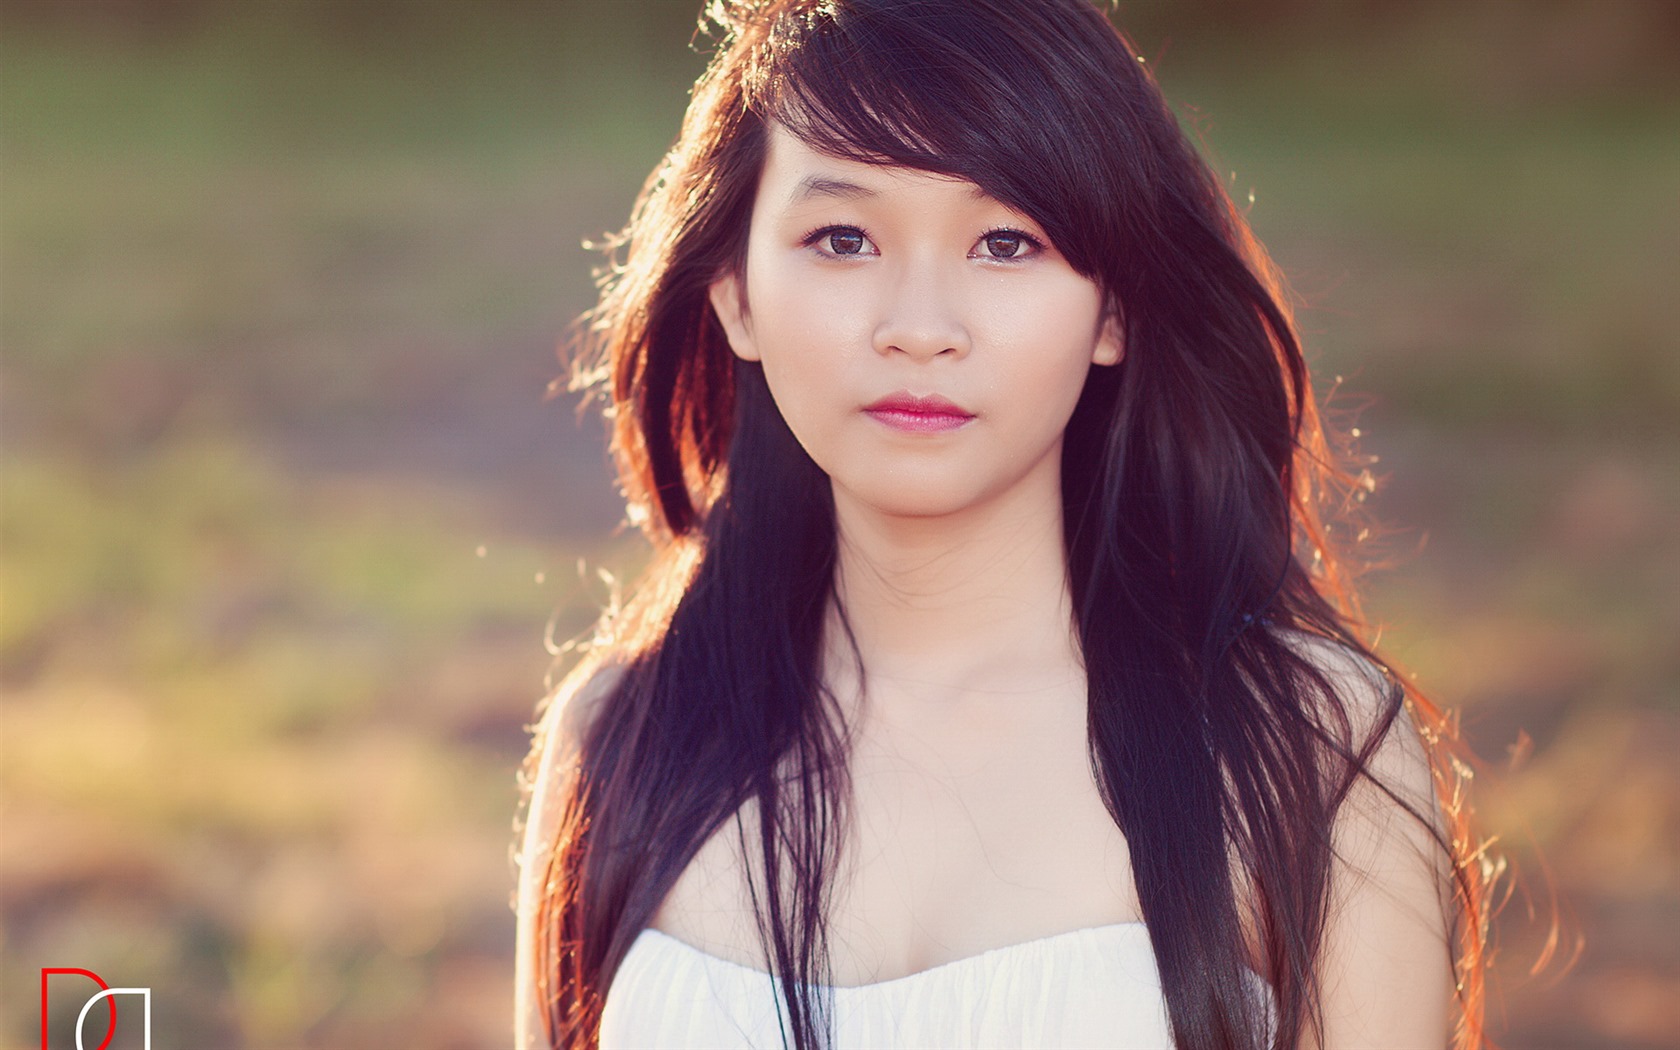 Pure and lovely young Asian girl HD wallpapers collection (4) #25 - 1680x1050